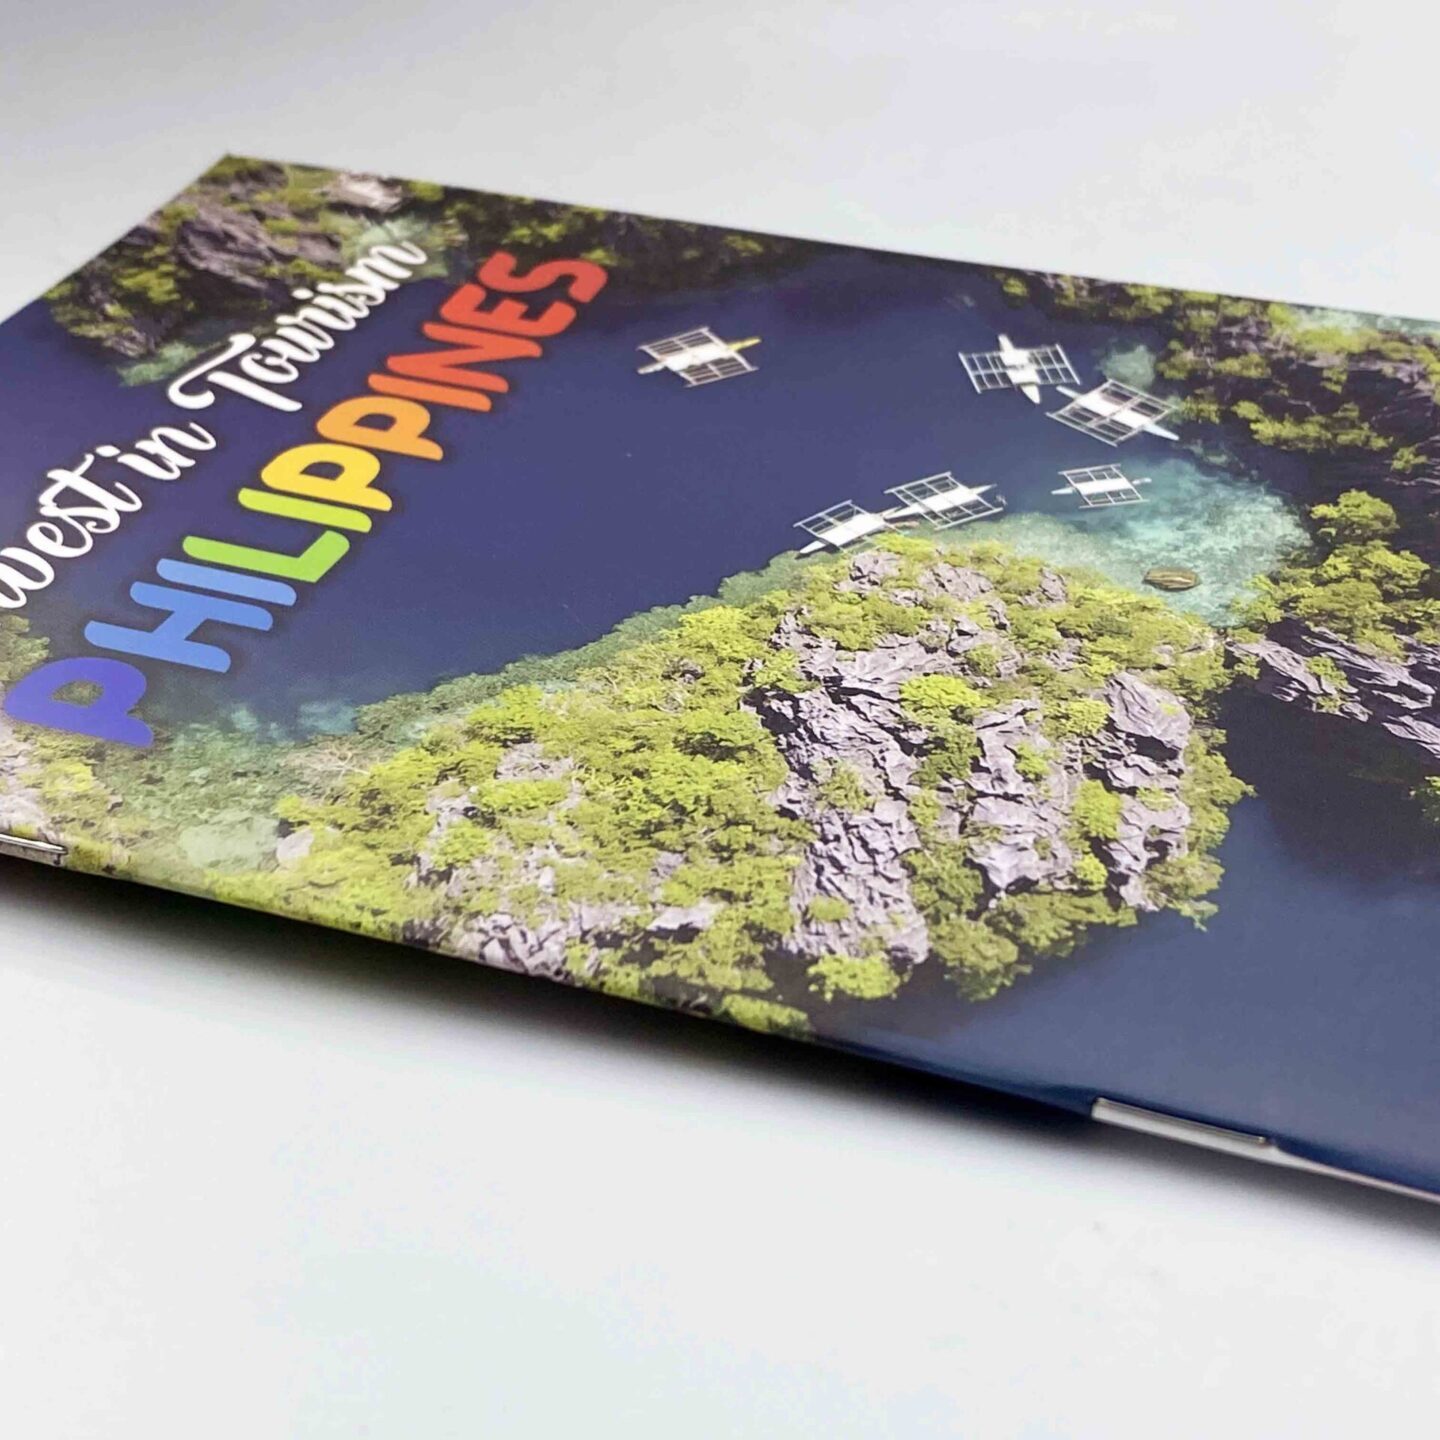 Department of Tourism Invest in Tourism Frequently Asked Questions Brochure #vjgraphicsprinting #offsetprinting #digitalprinting #growthroughprint #brochure